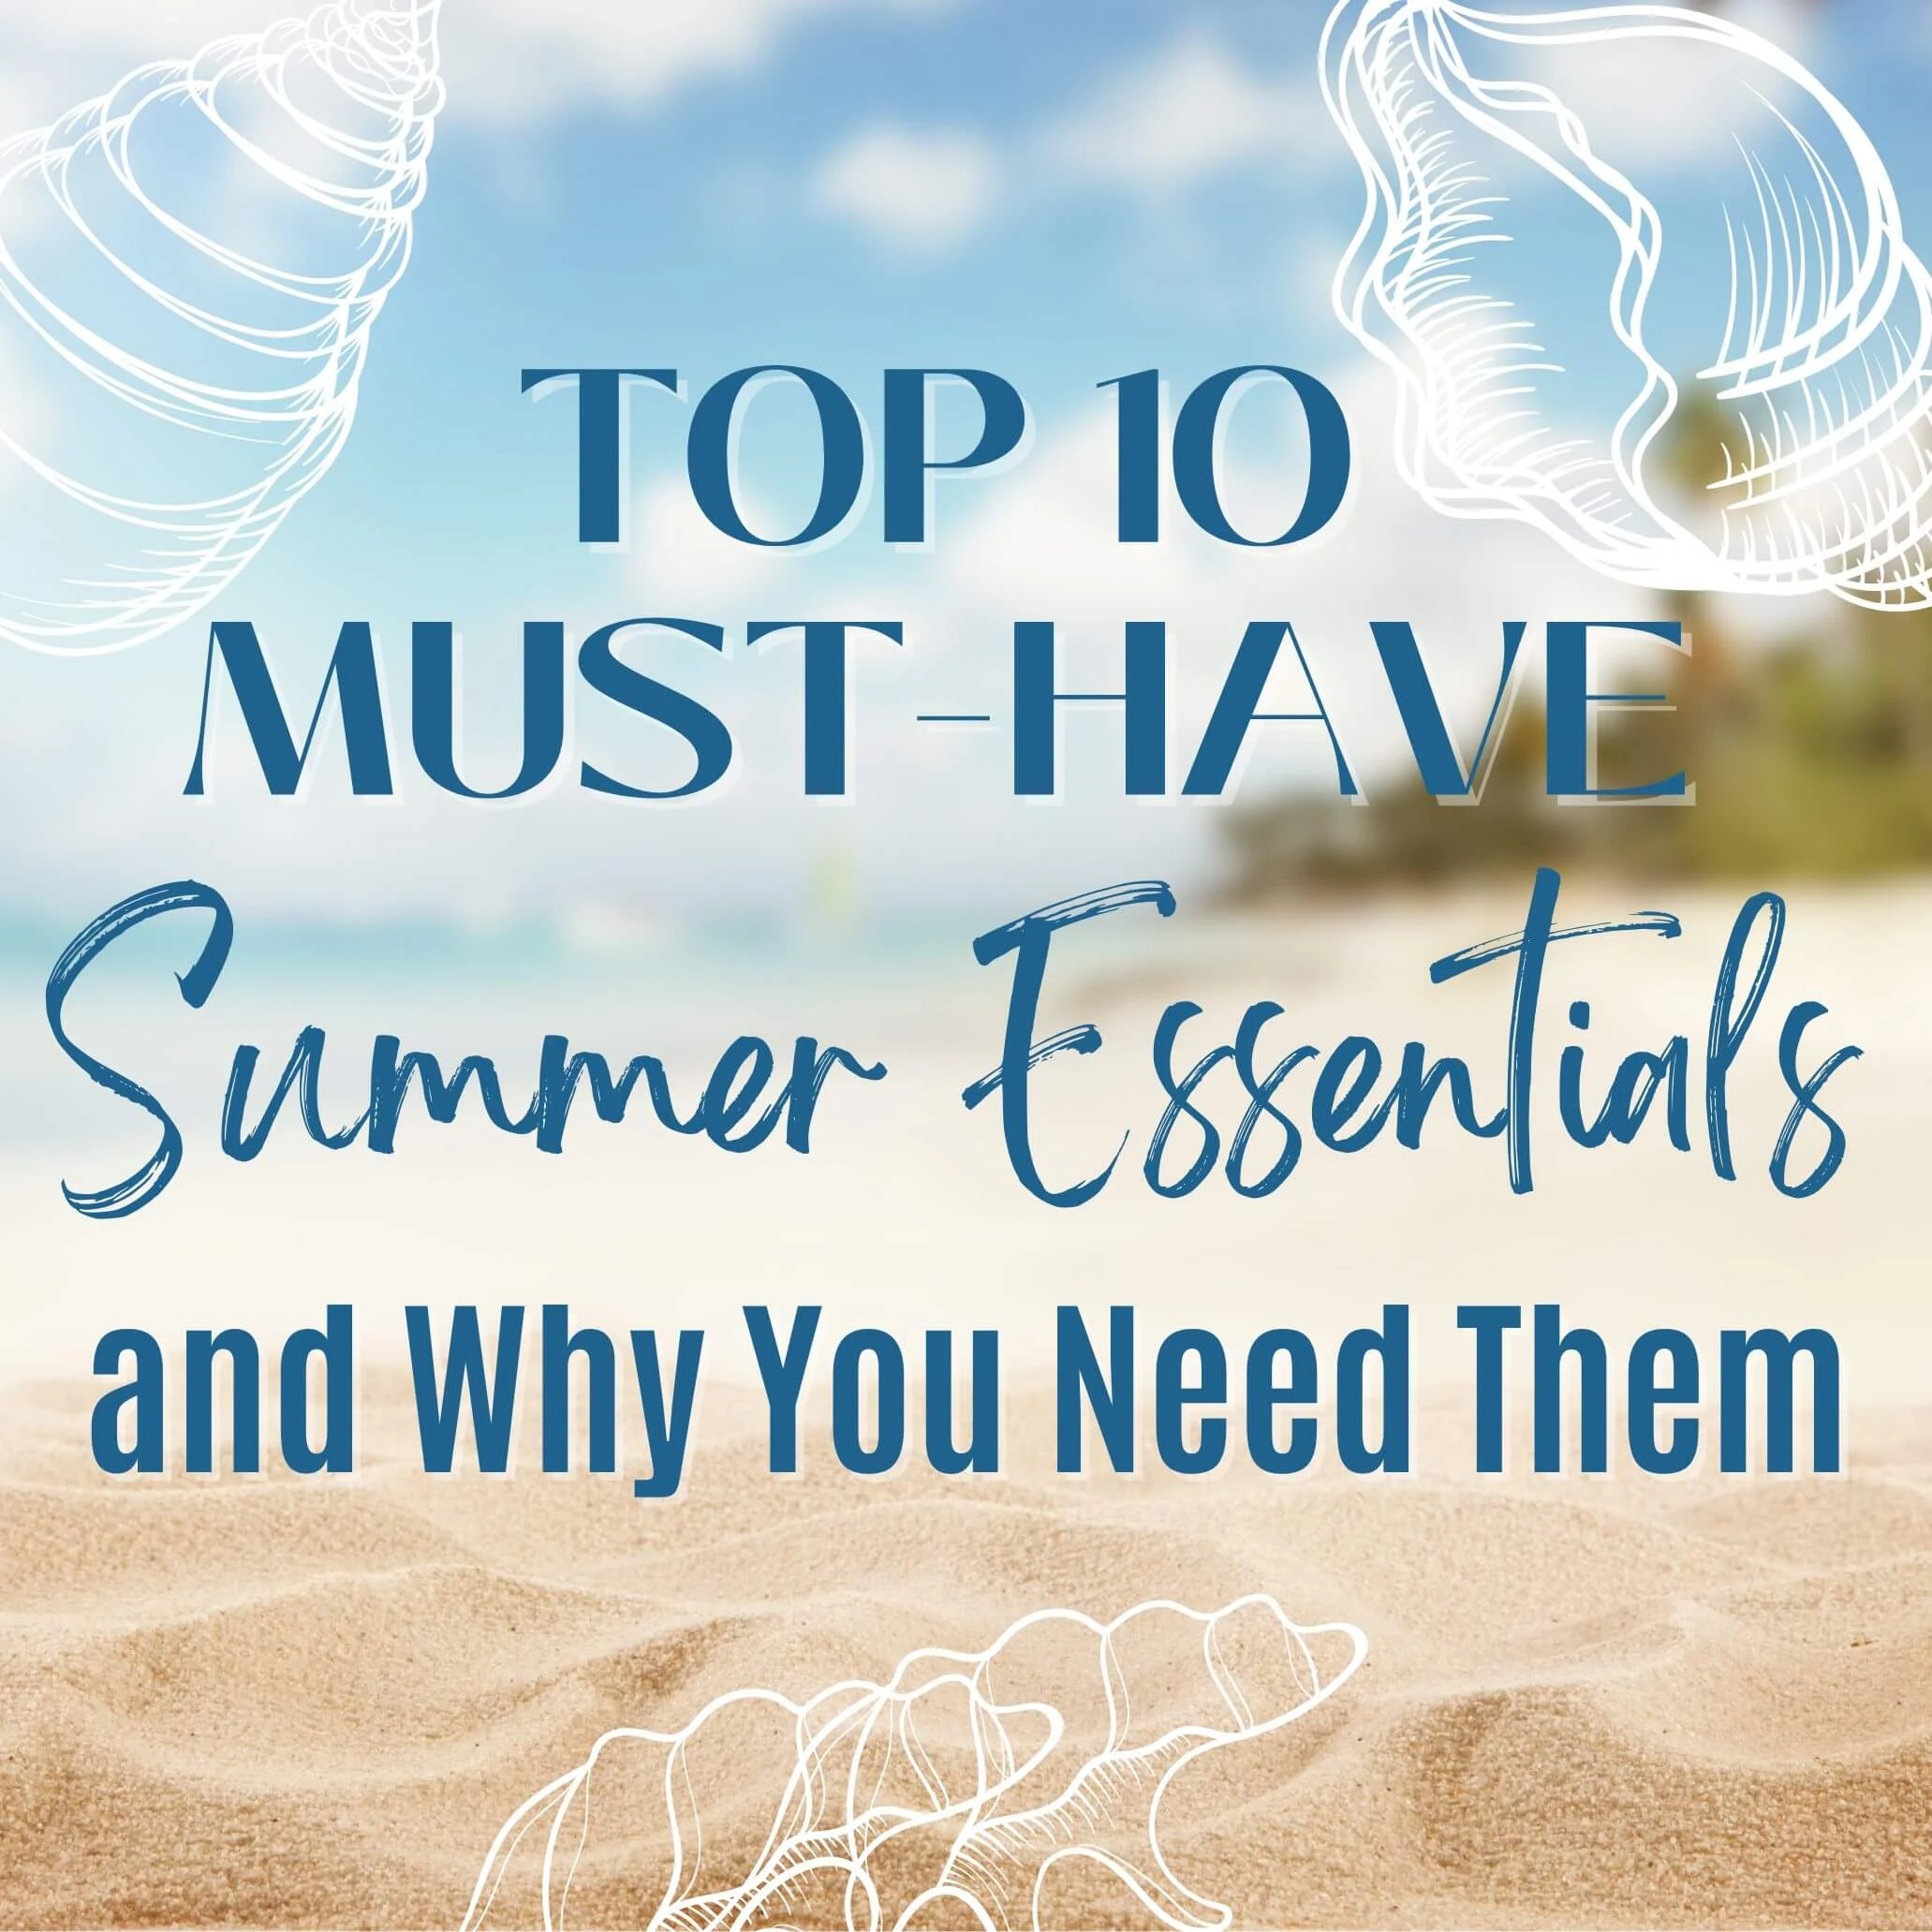 Top 10 Must-Have Summer Essentials and Why You Need Them